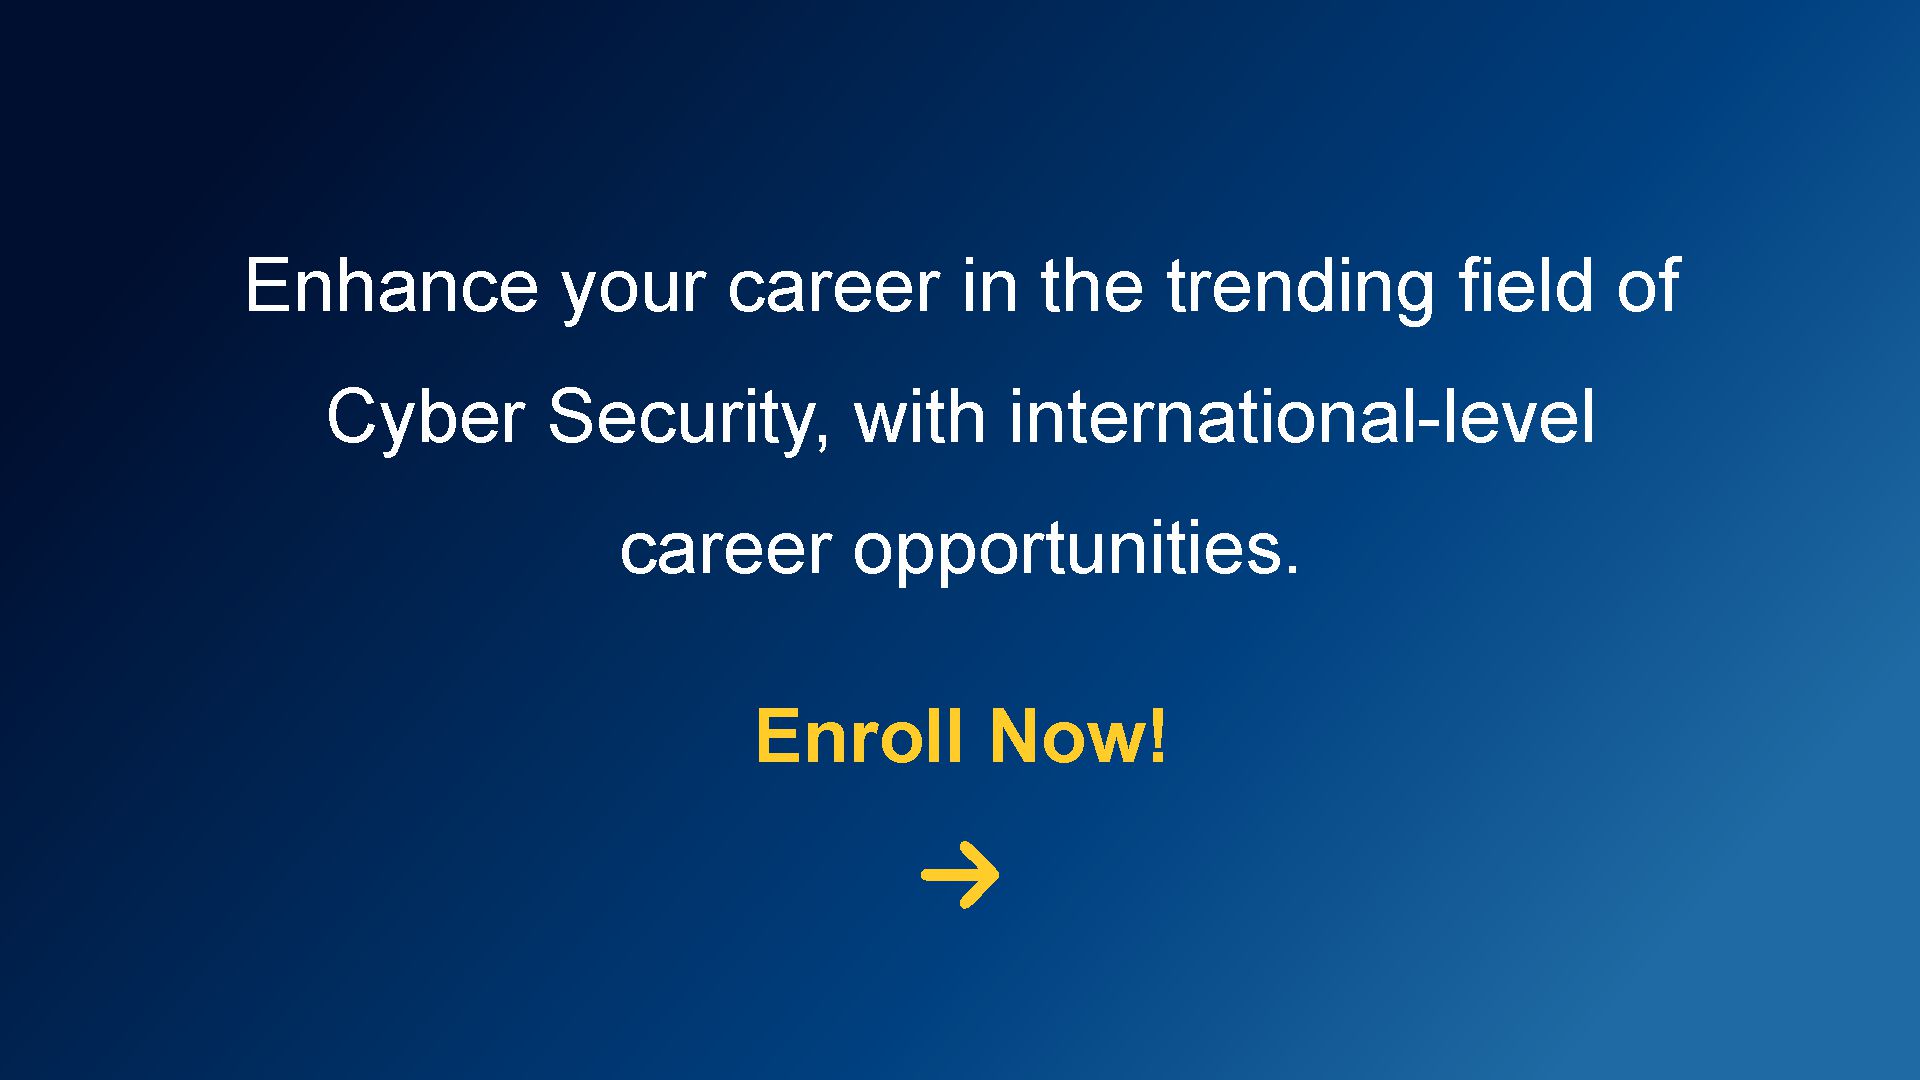 IU International University Of Applied Sciences Masters Of Science (M.Sc.) In Cyber Security